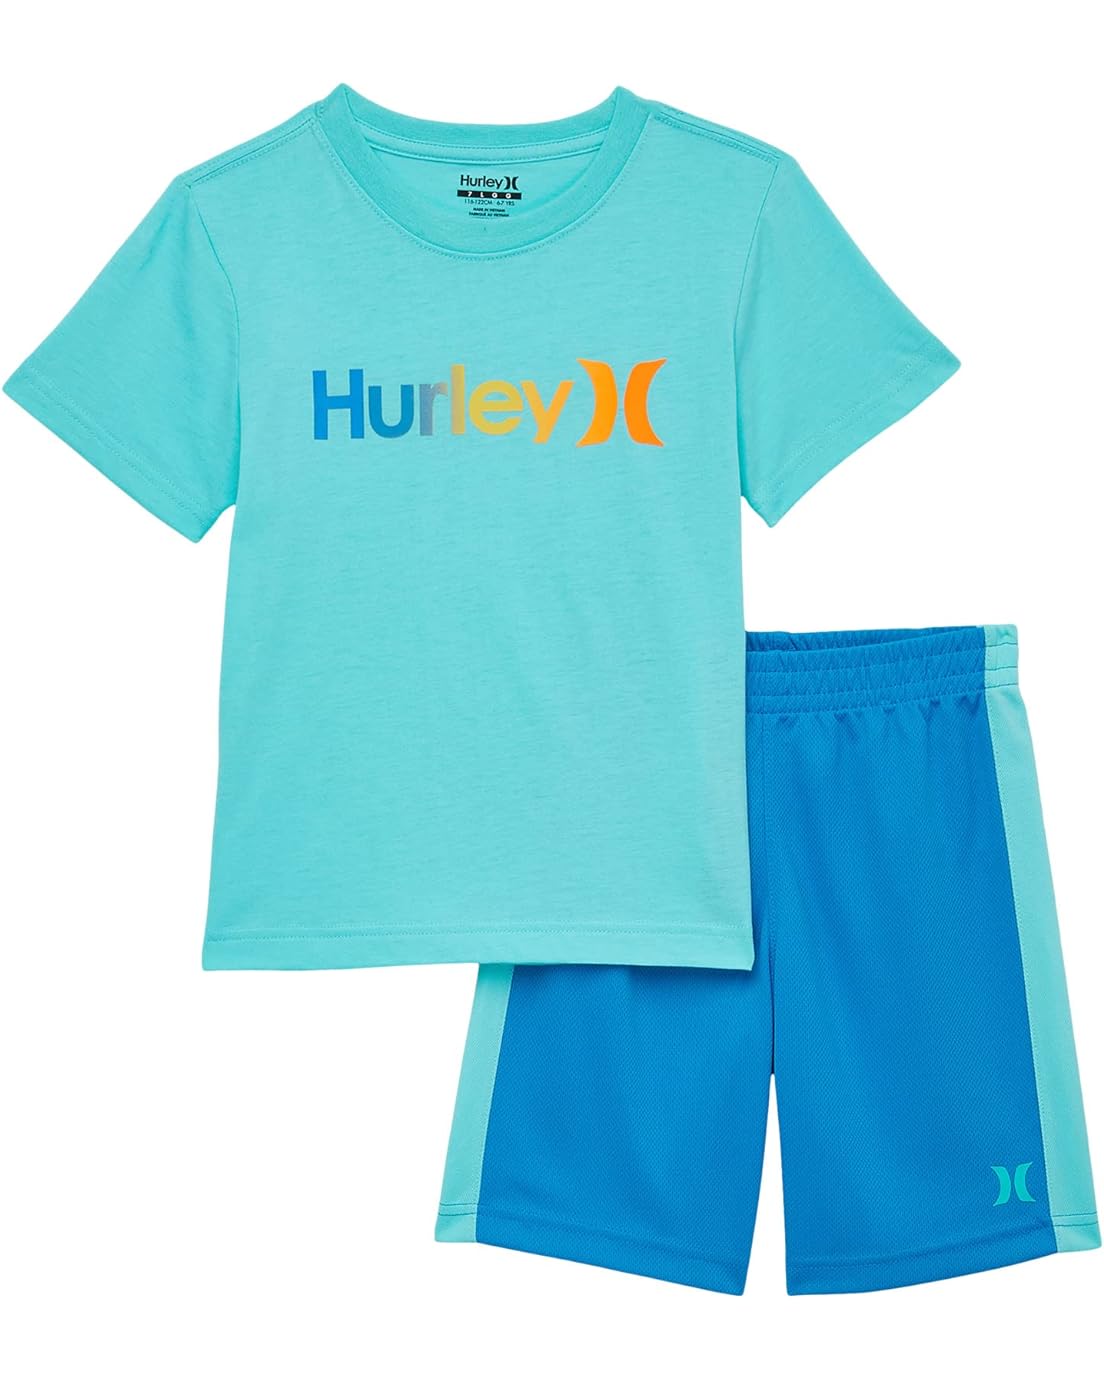 Hurley Kids Graphic T-Shirt and Shorts Two-Piece Set (Little Kids)